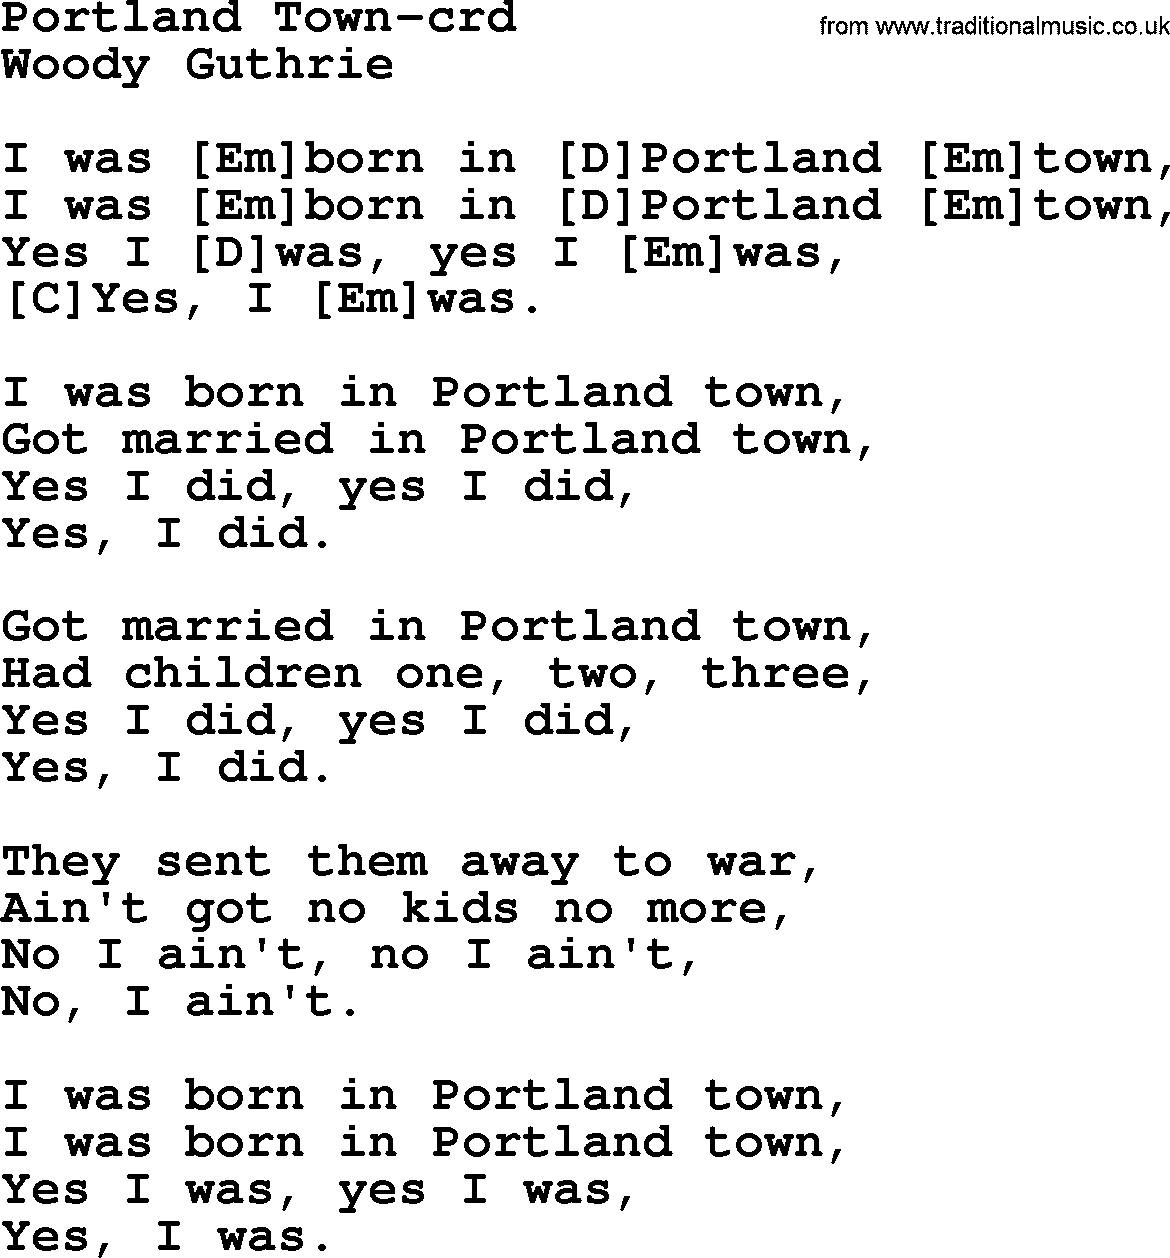 Woody Guthrie song Portland Town lyrics and chords